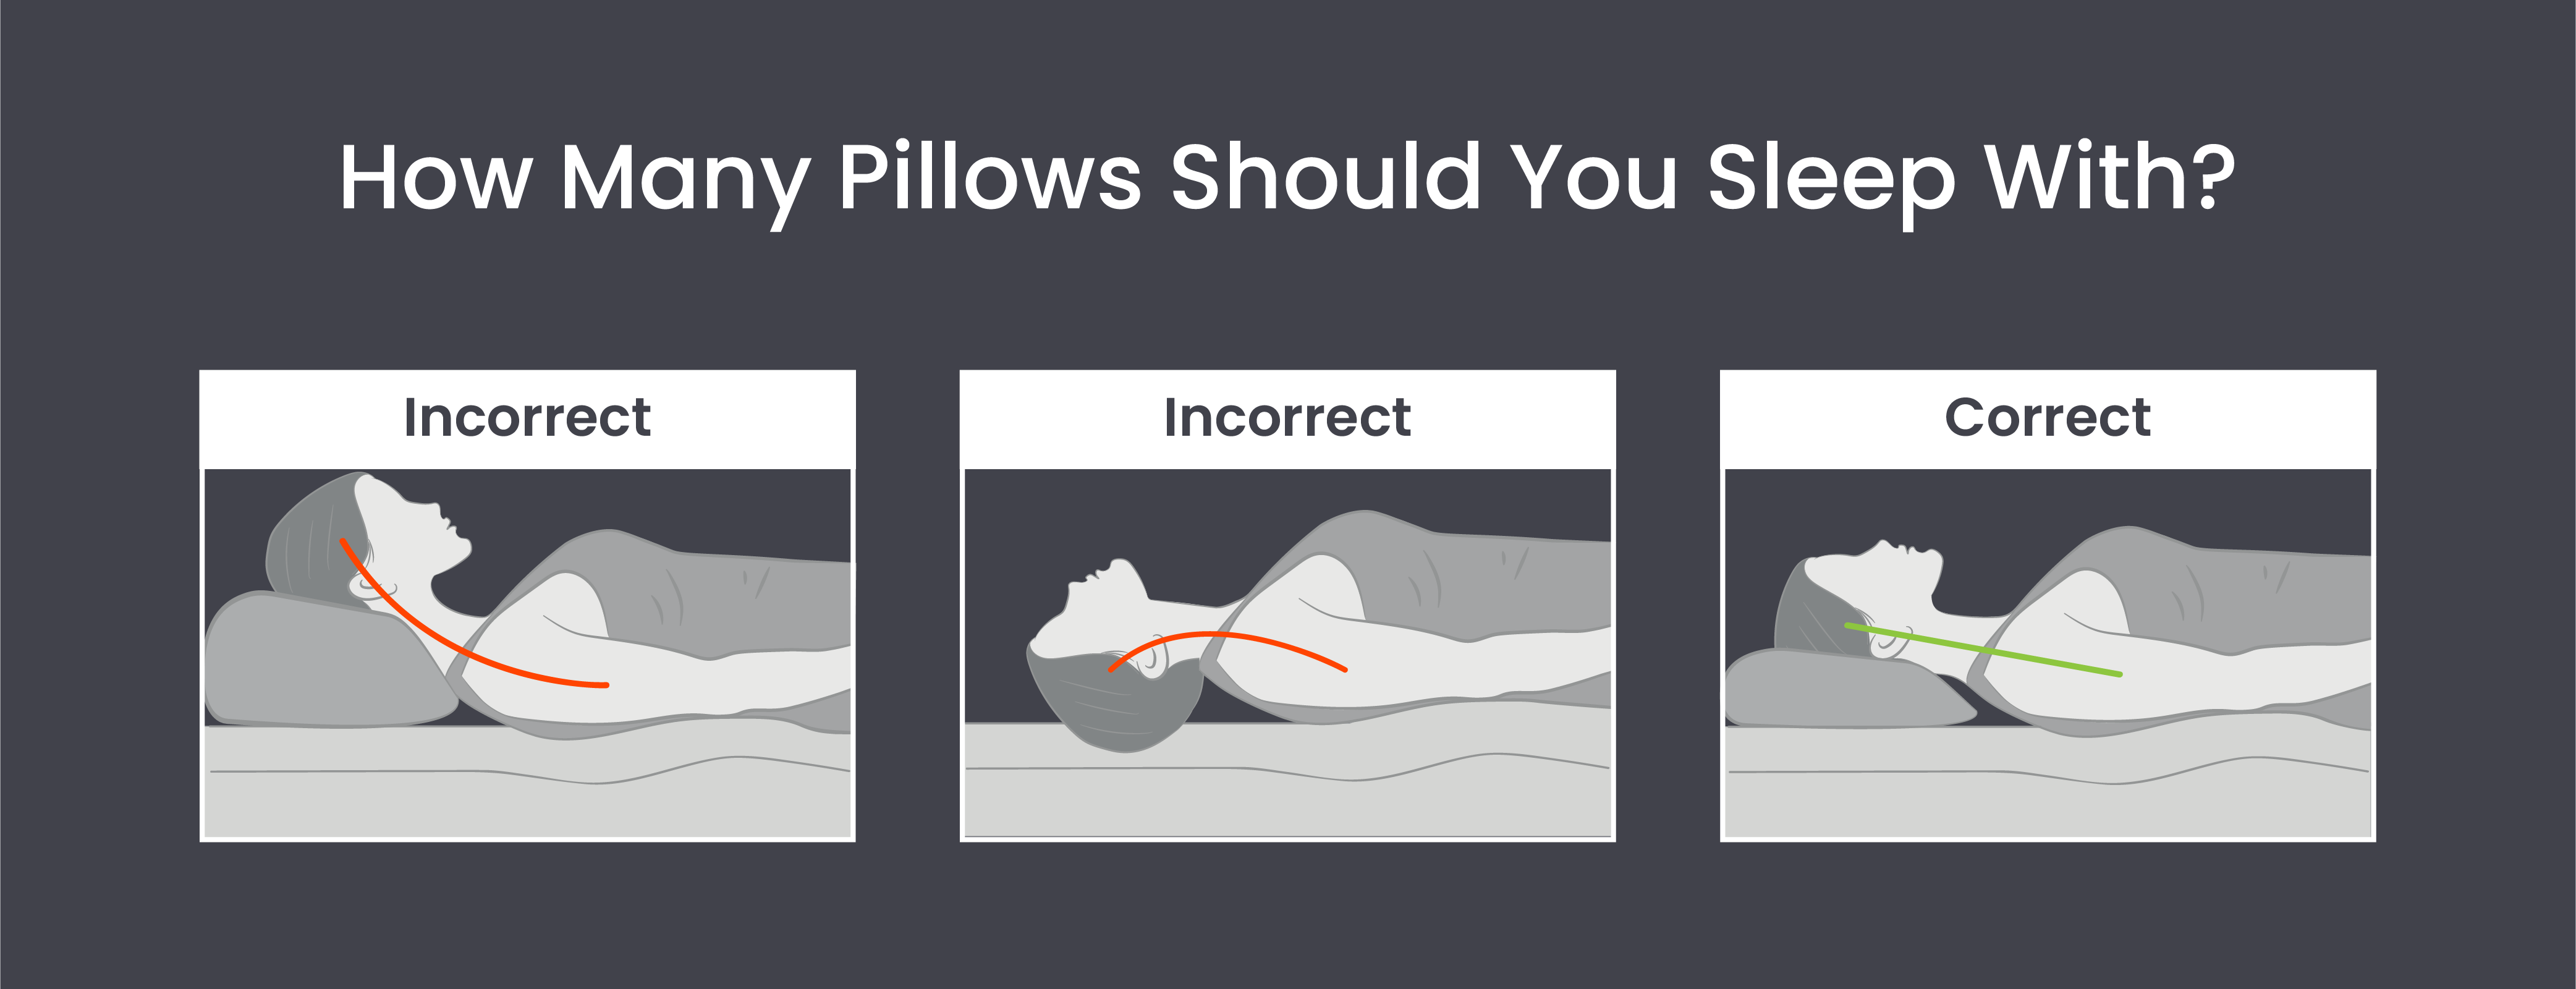 How many pillows should you sleep with?